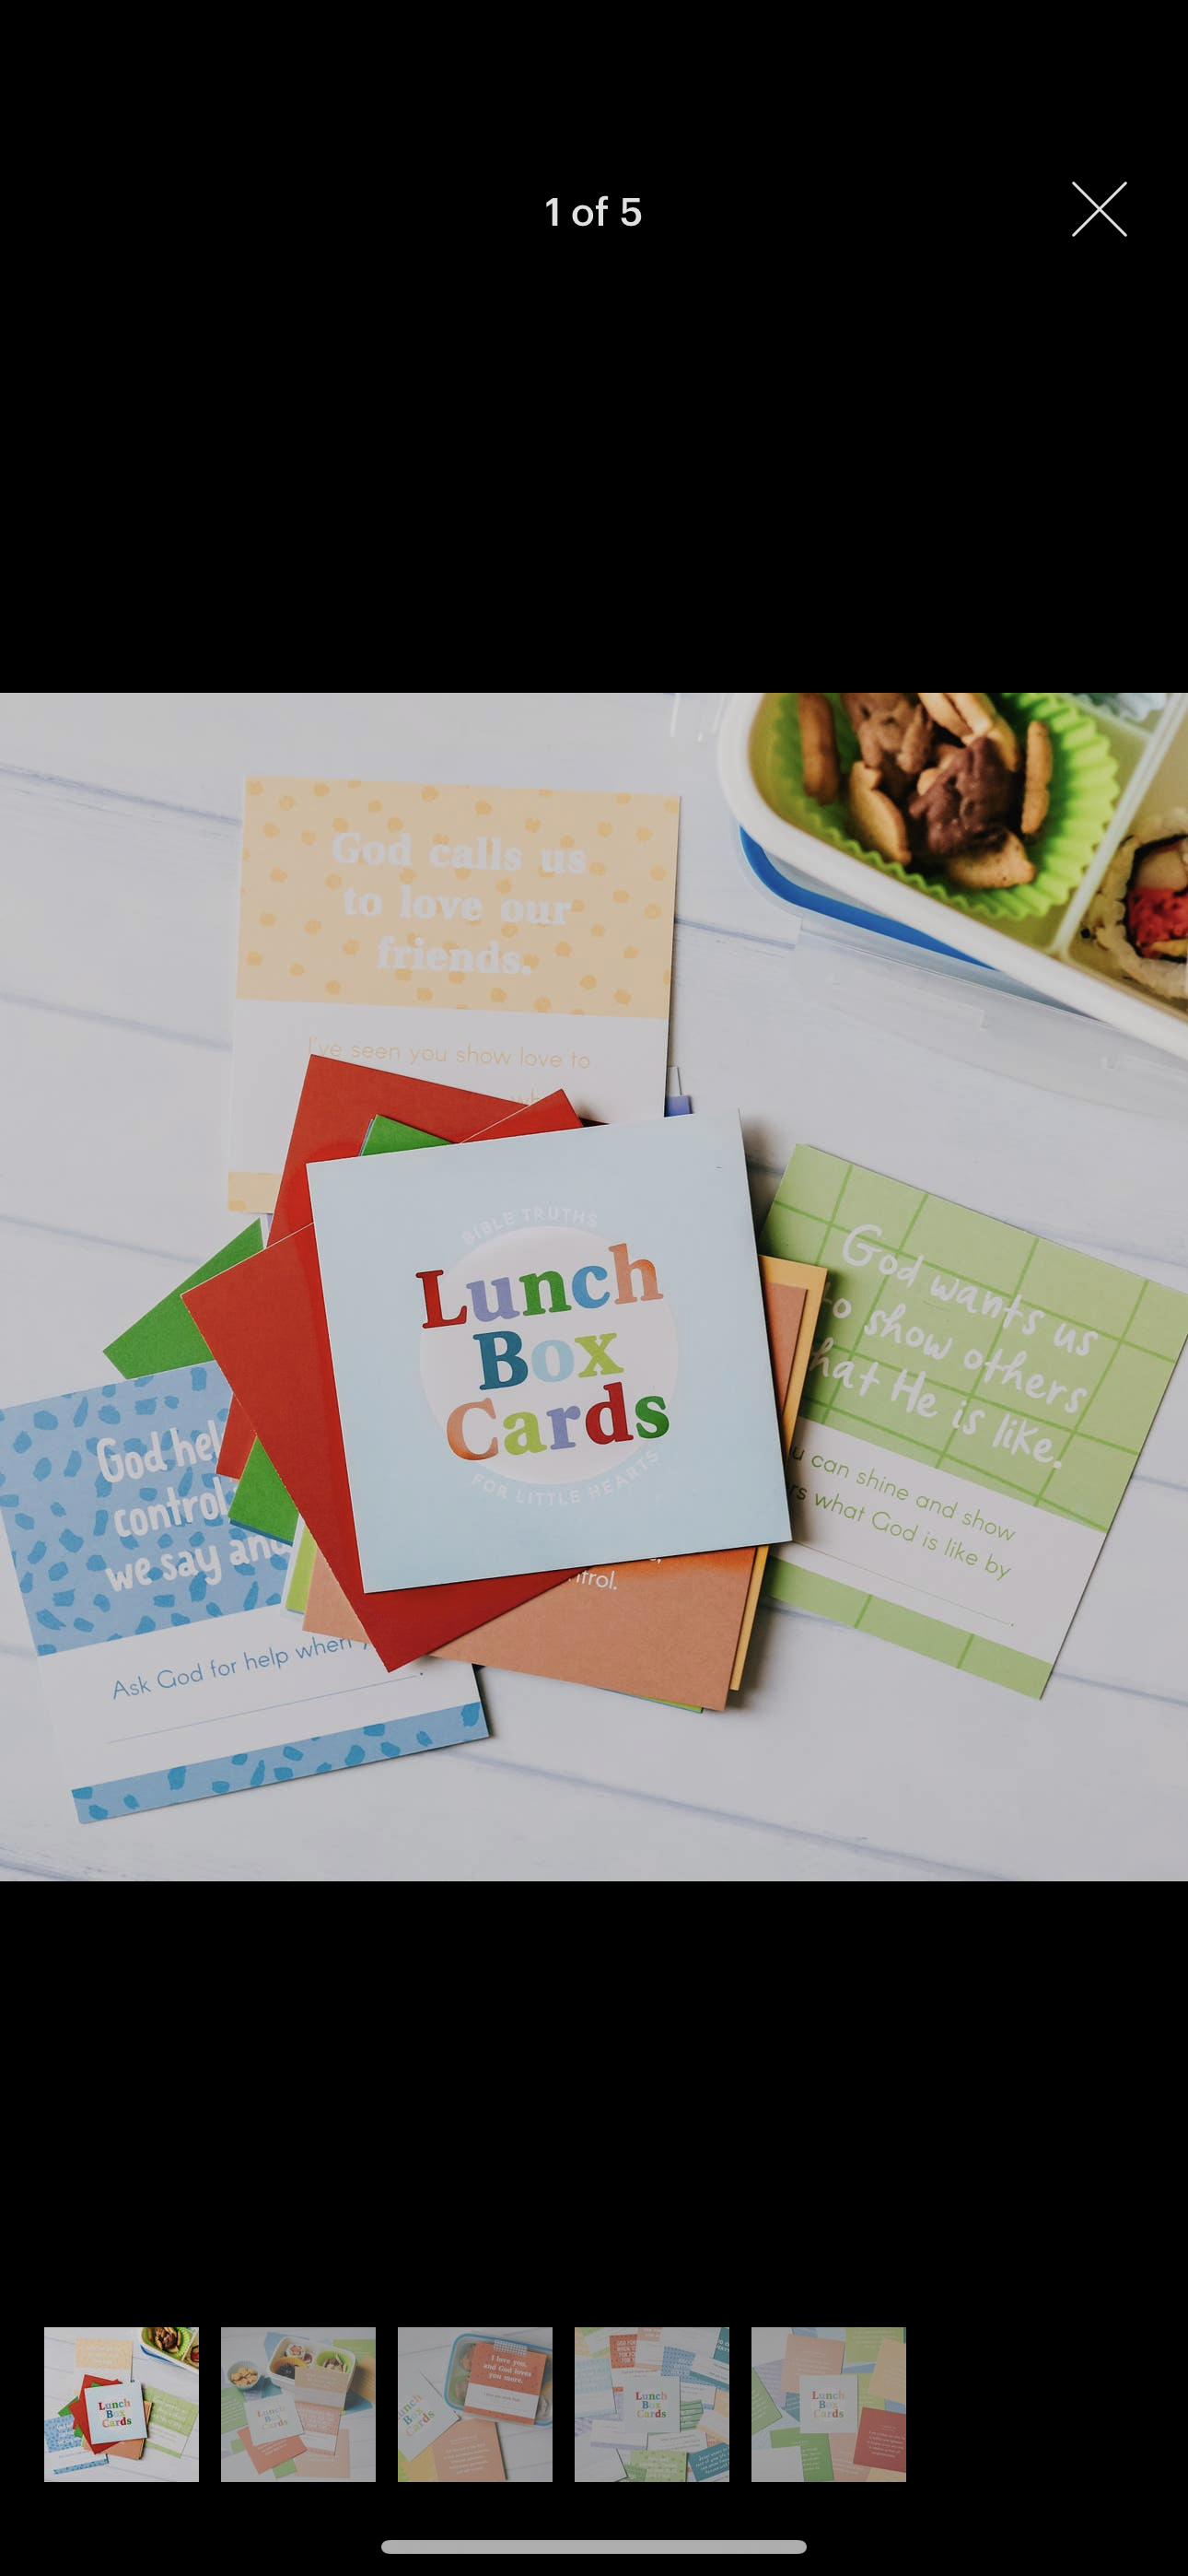 LUNCH BOX CARDS